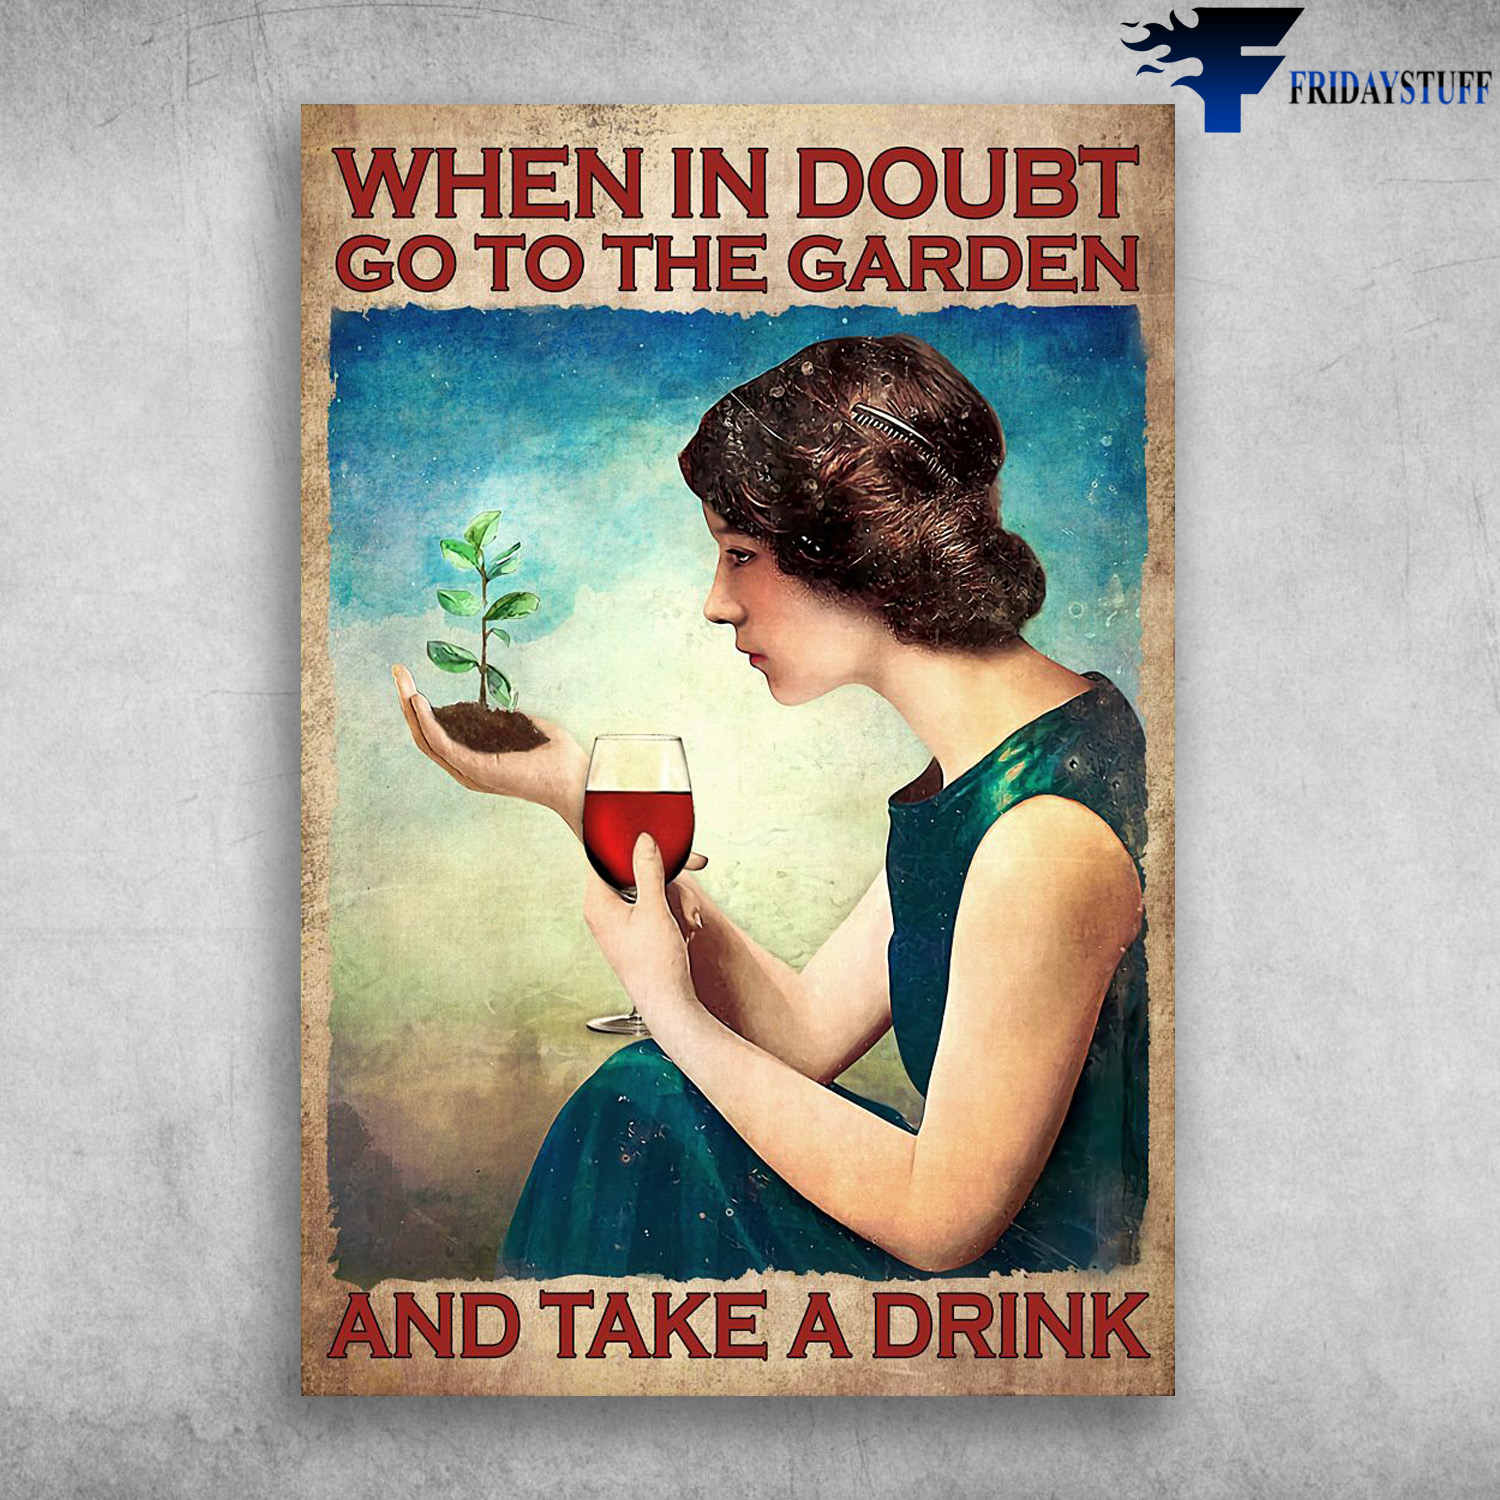 Girl Loves Garden And Wine - When In Doubt, Go To The Garden, And Take A Drink